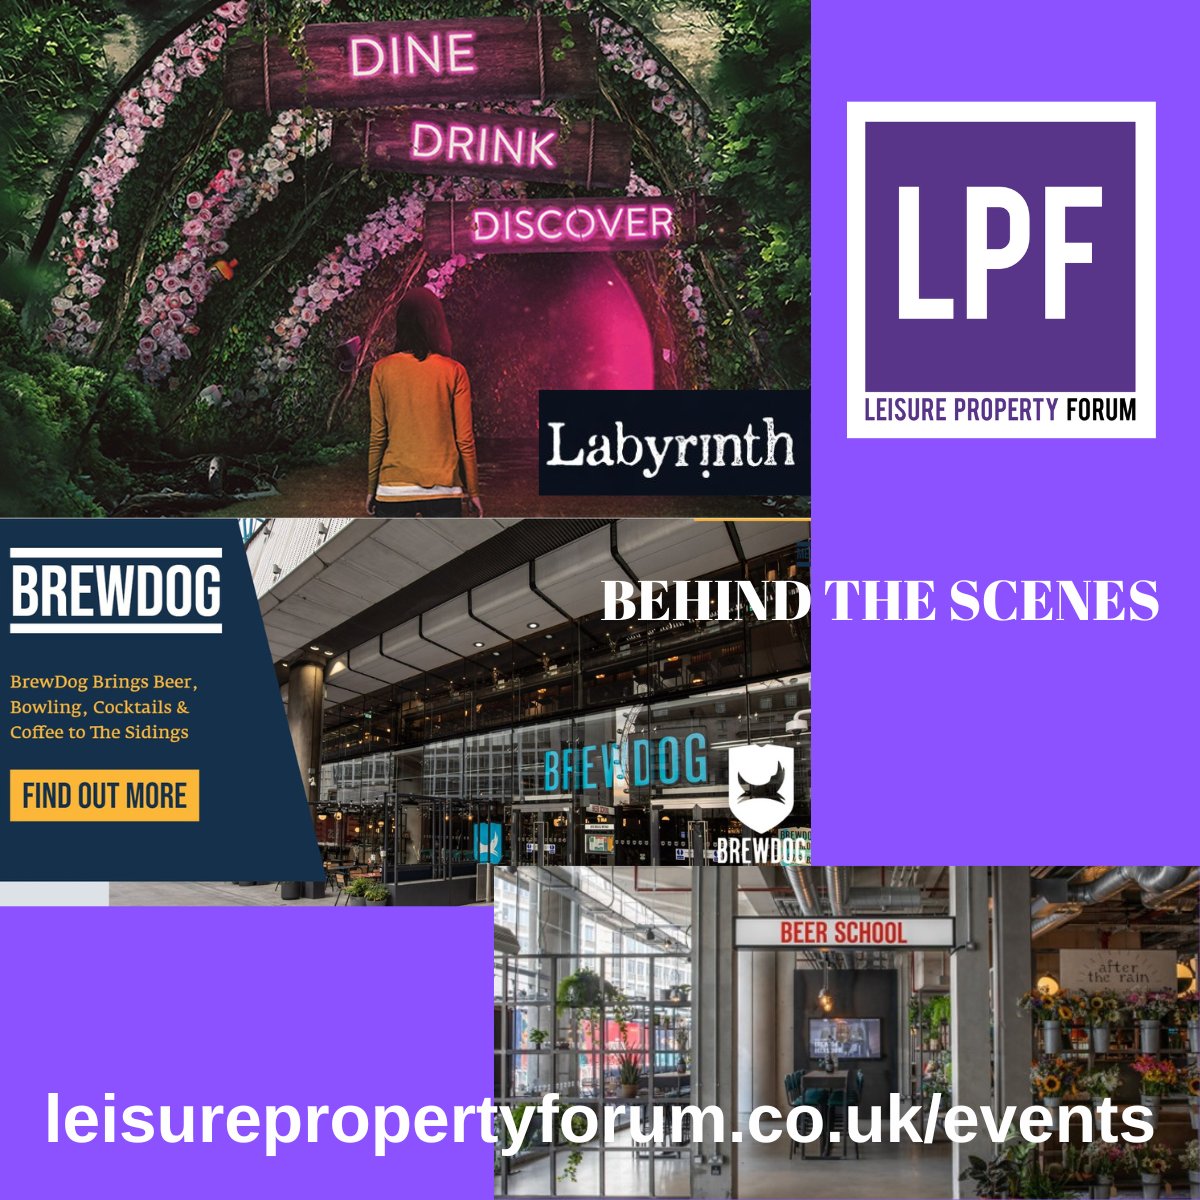 NEW EVENT FOR JUNE - book now... leisurepropertyforum.co.uk/events/ #commercialproperty #leisuresector #hospitalitysector #leisureproperty